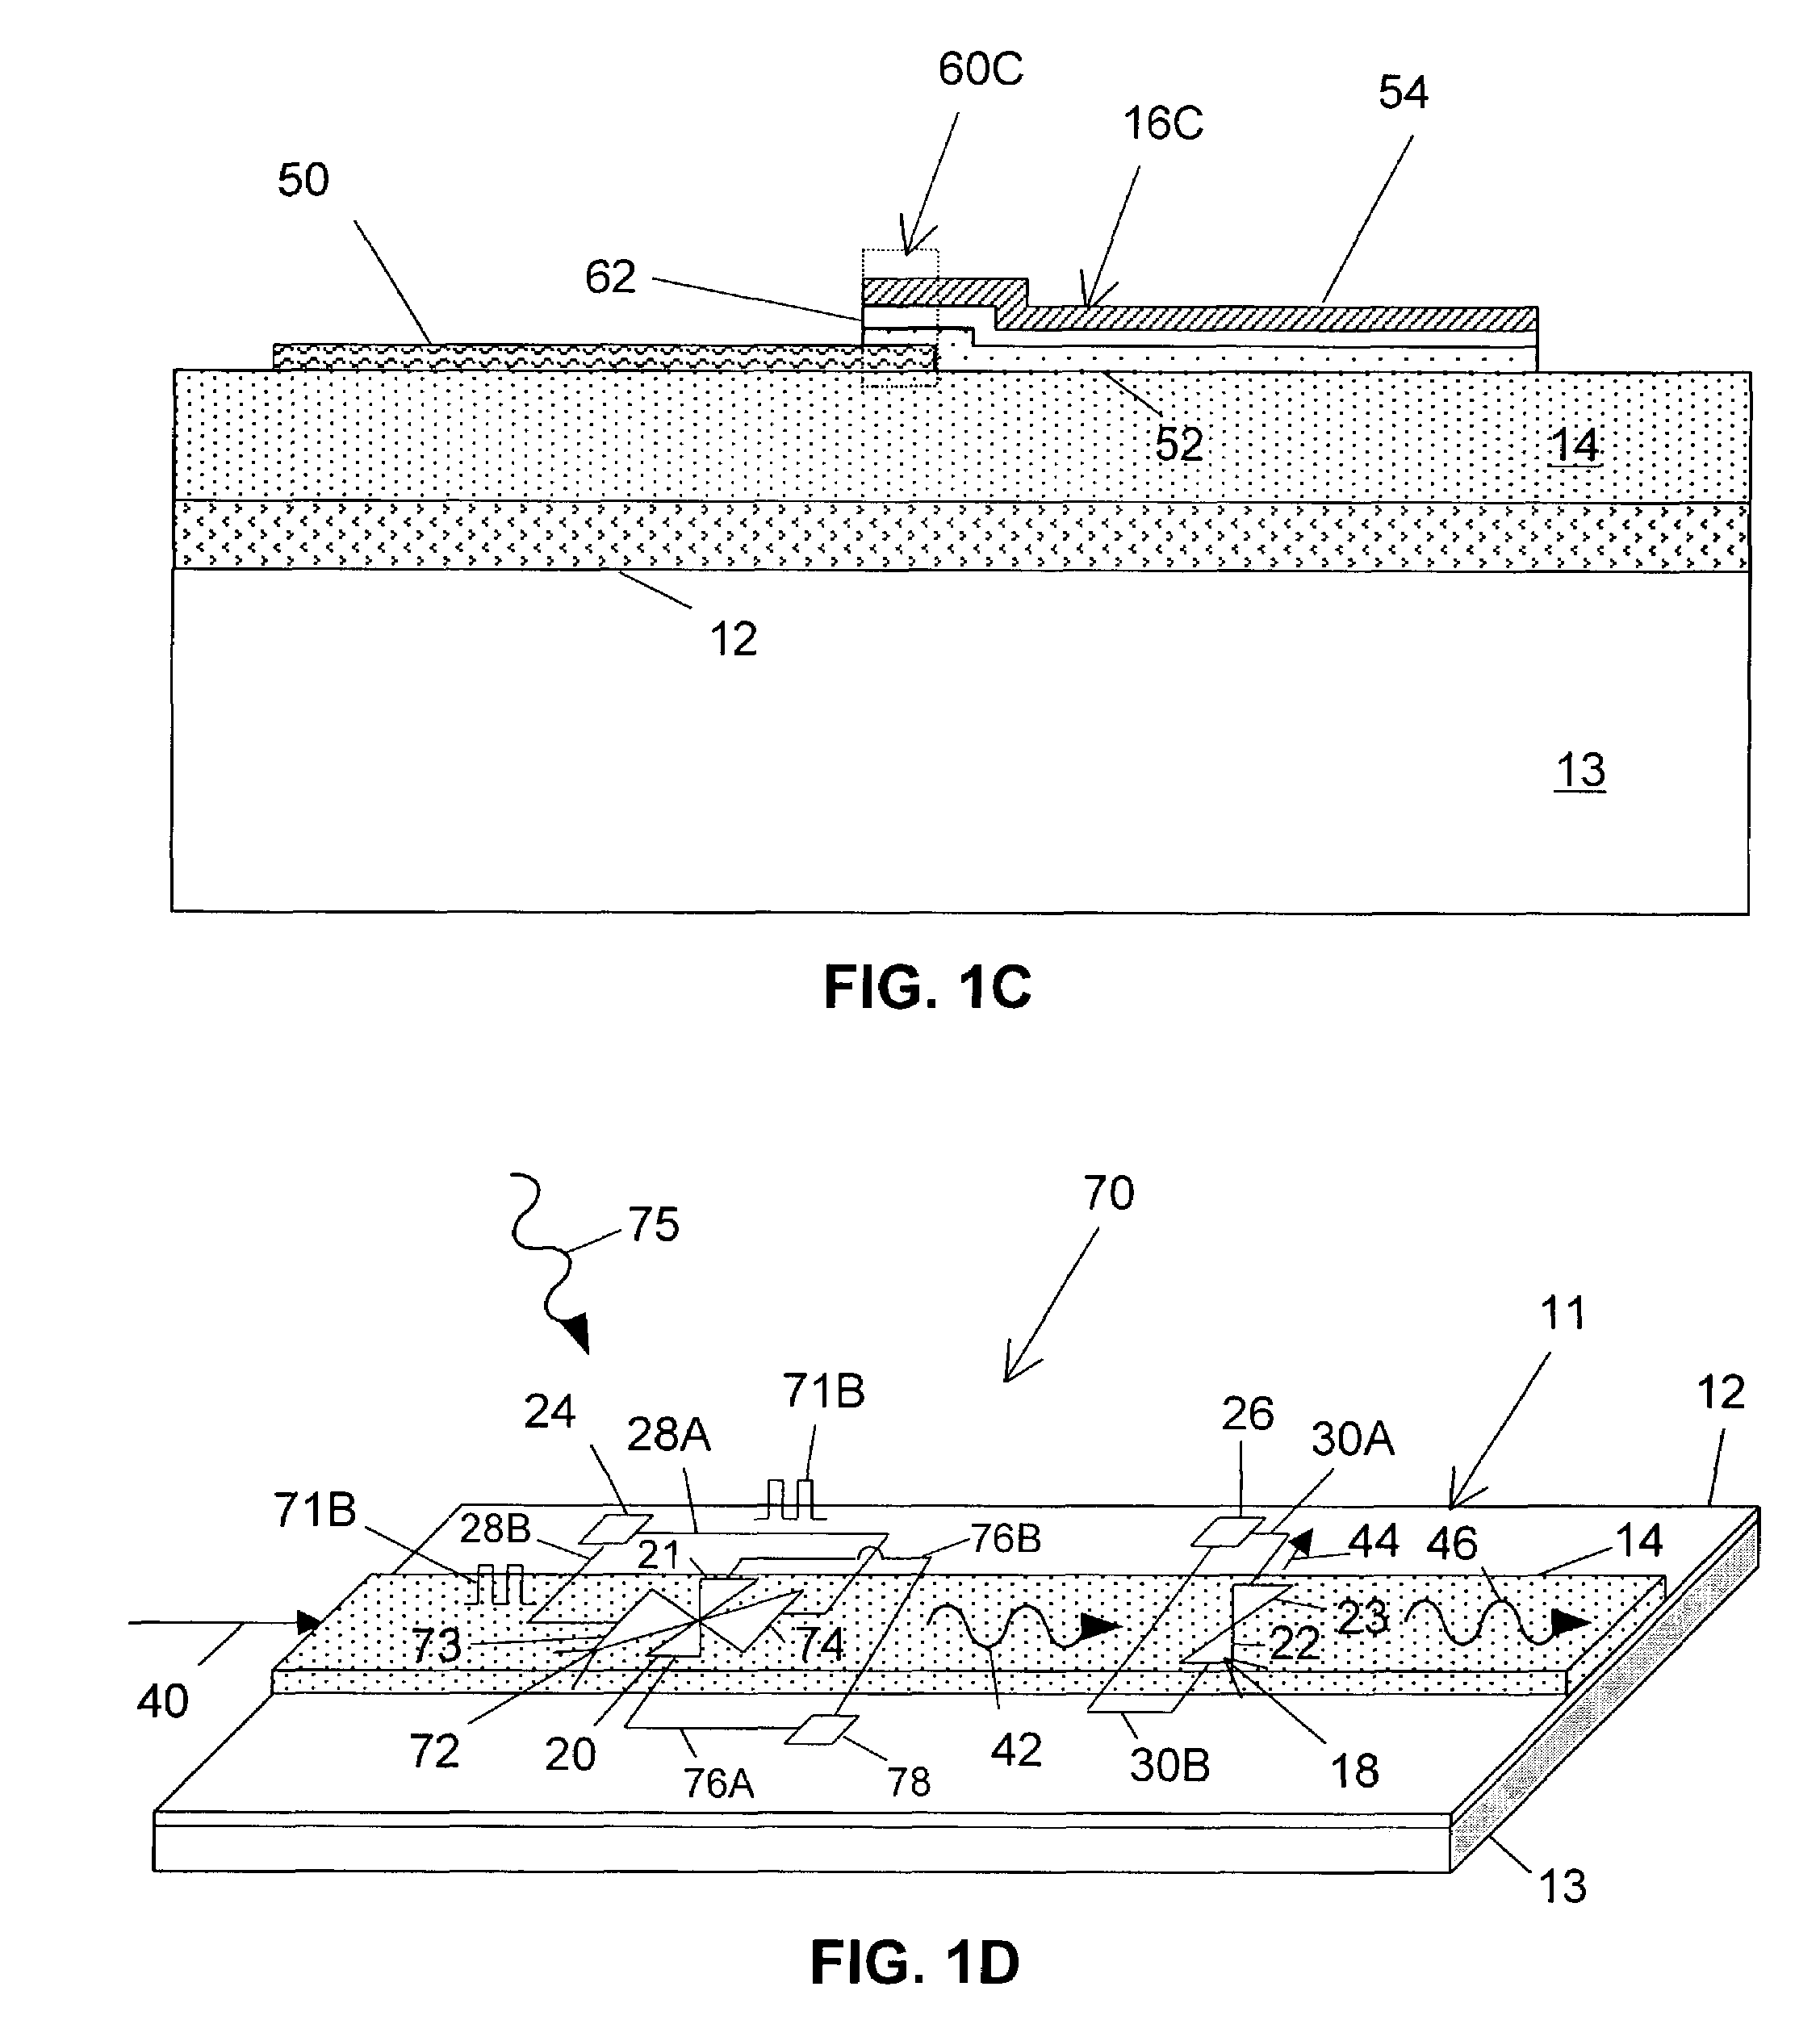 Terahertz interconnect system and applications